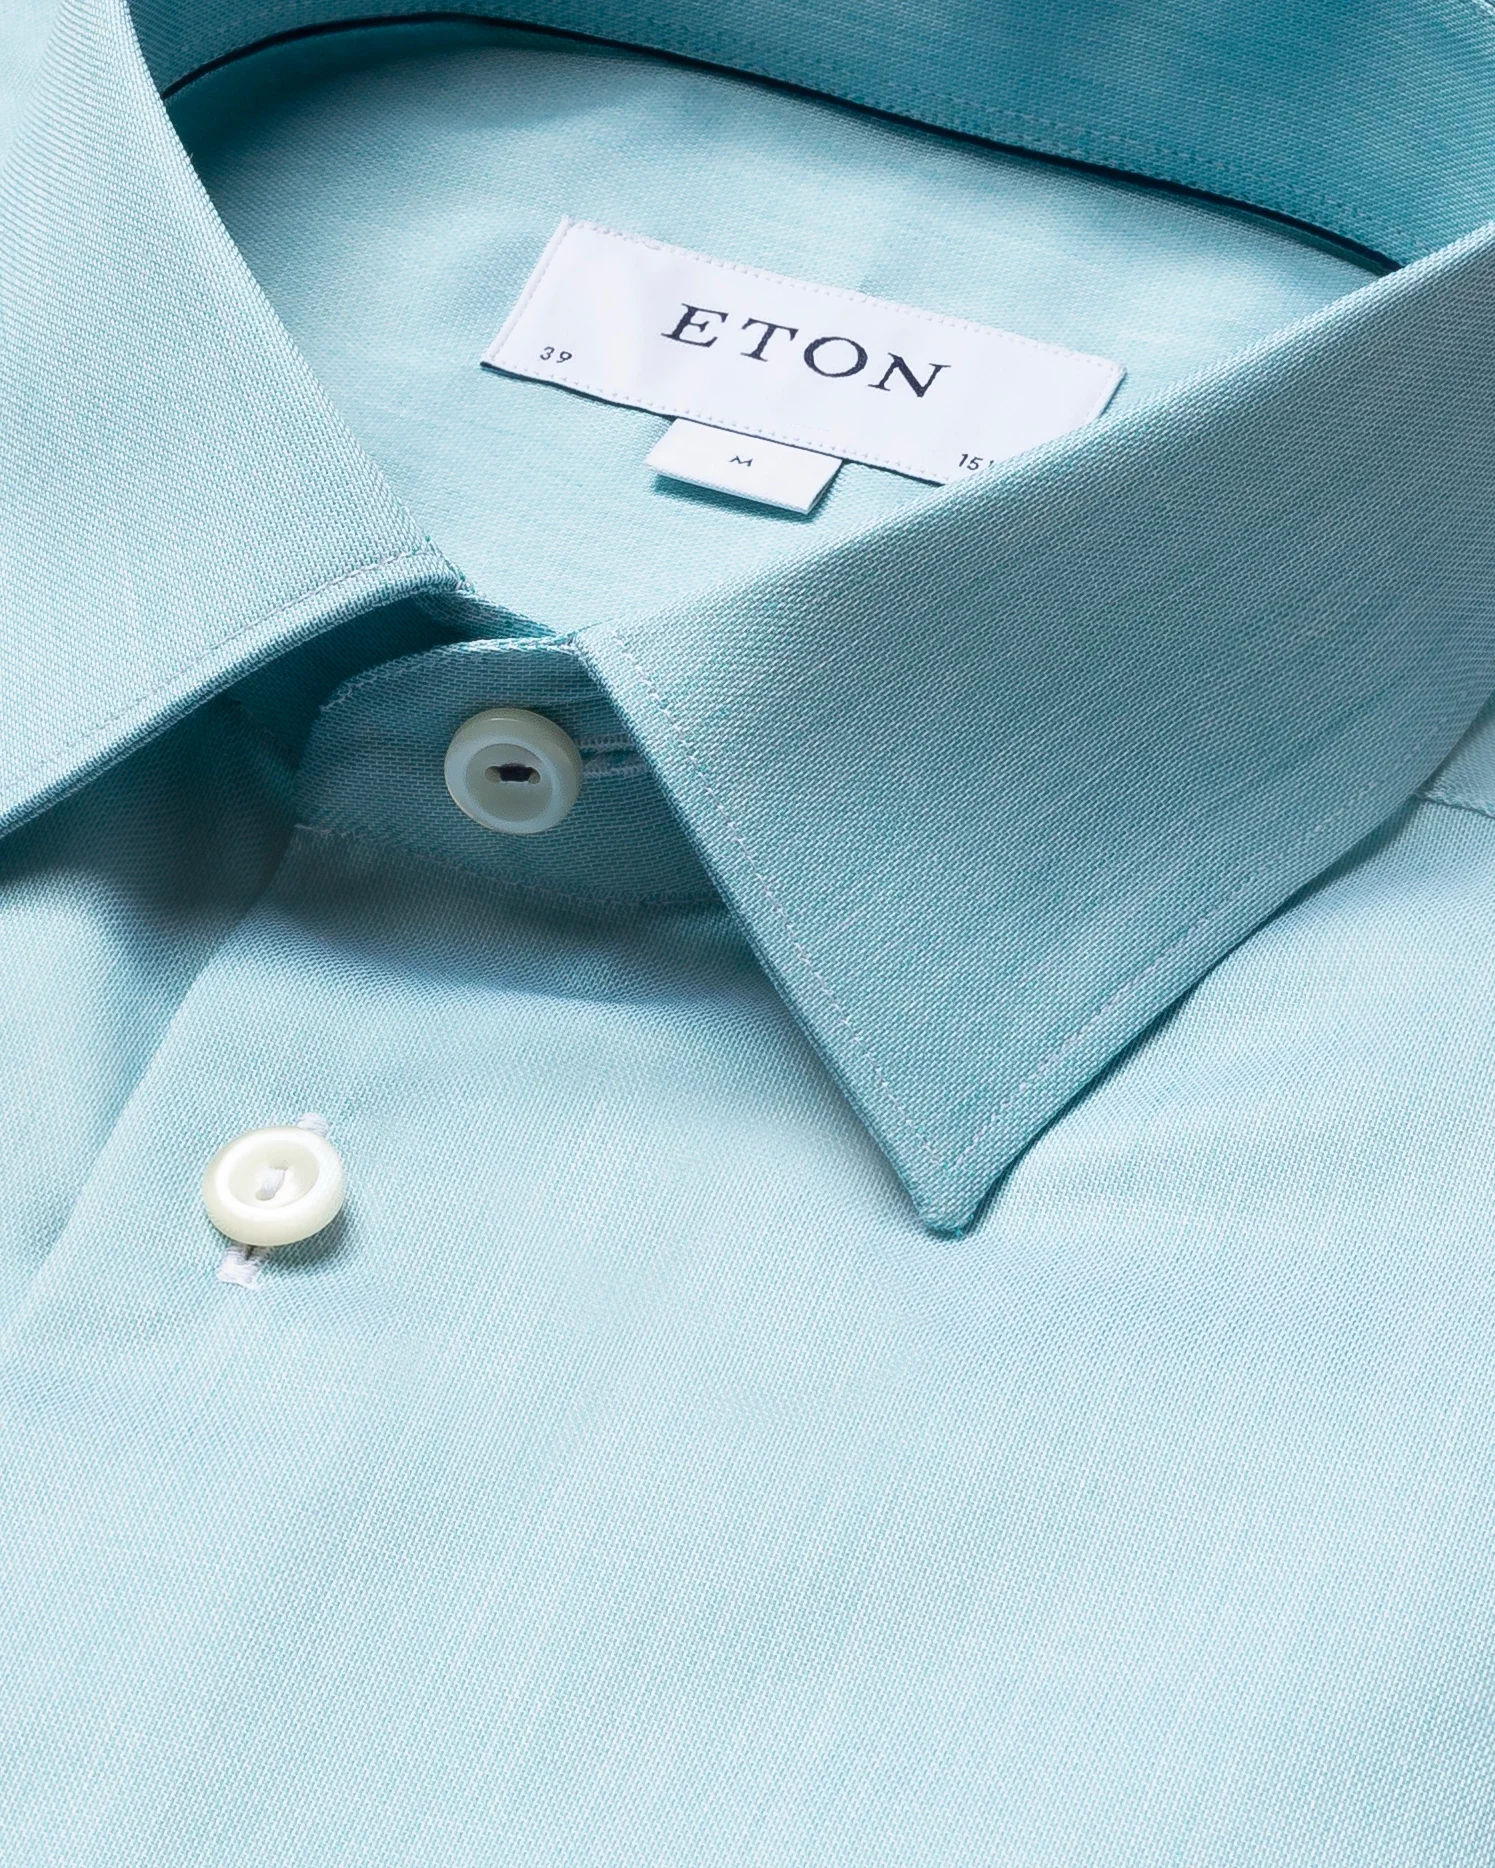 Eton - turquoise twill shirt navy piping pointed